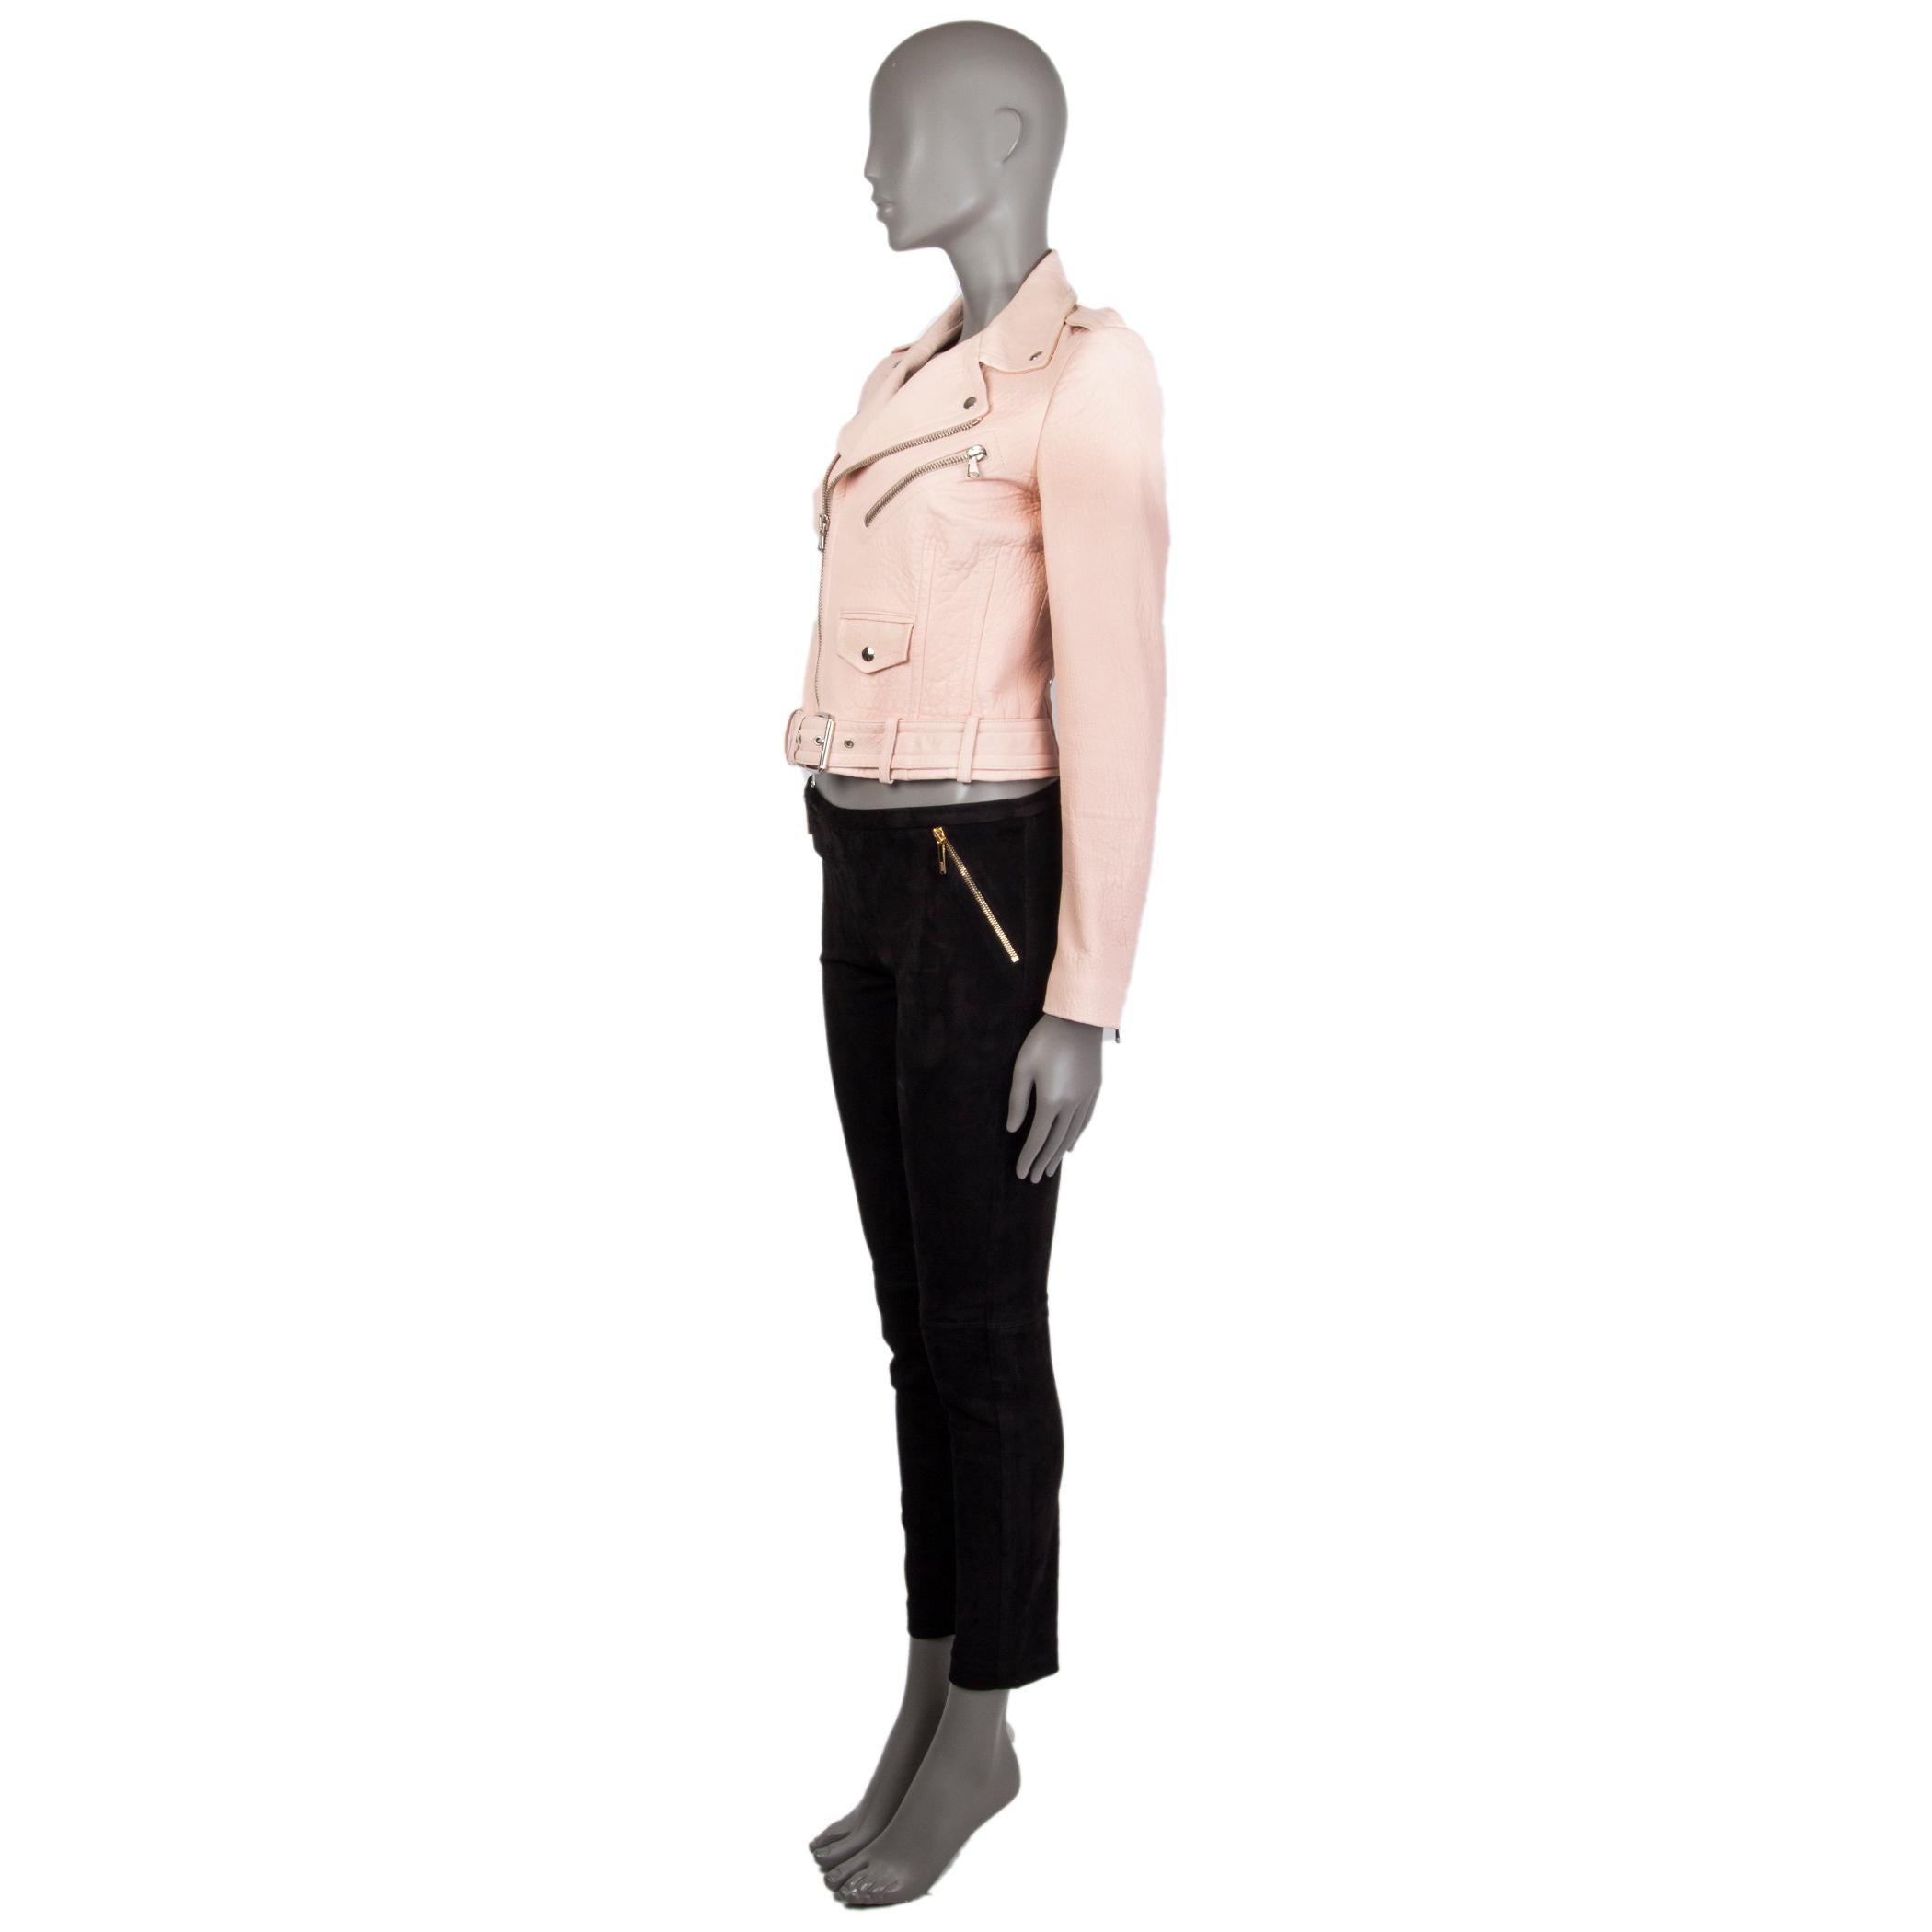 Alexander McQueen cropped biker jacket in pale pink textured calf leather. With epaulettes, buttoned notch collar, zipper pocket on the chest, buttoned flap pocket on the front, belt loops and attached belt on the front of the hemline, cinching belt